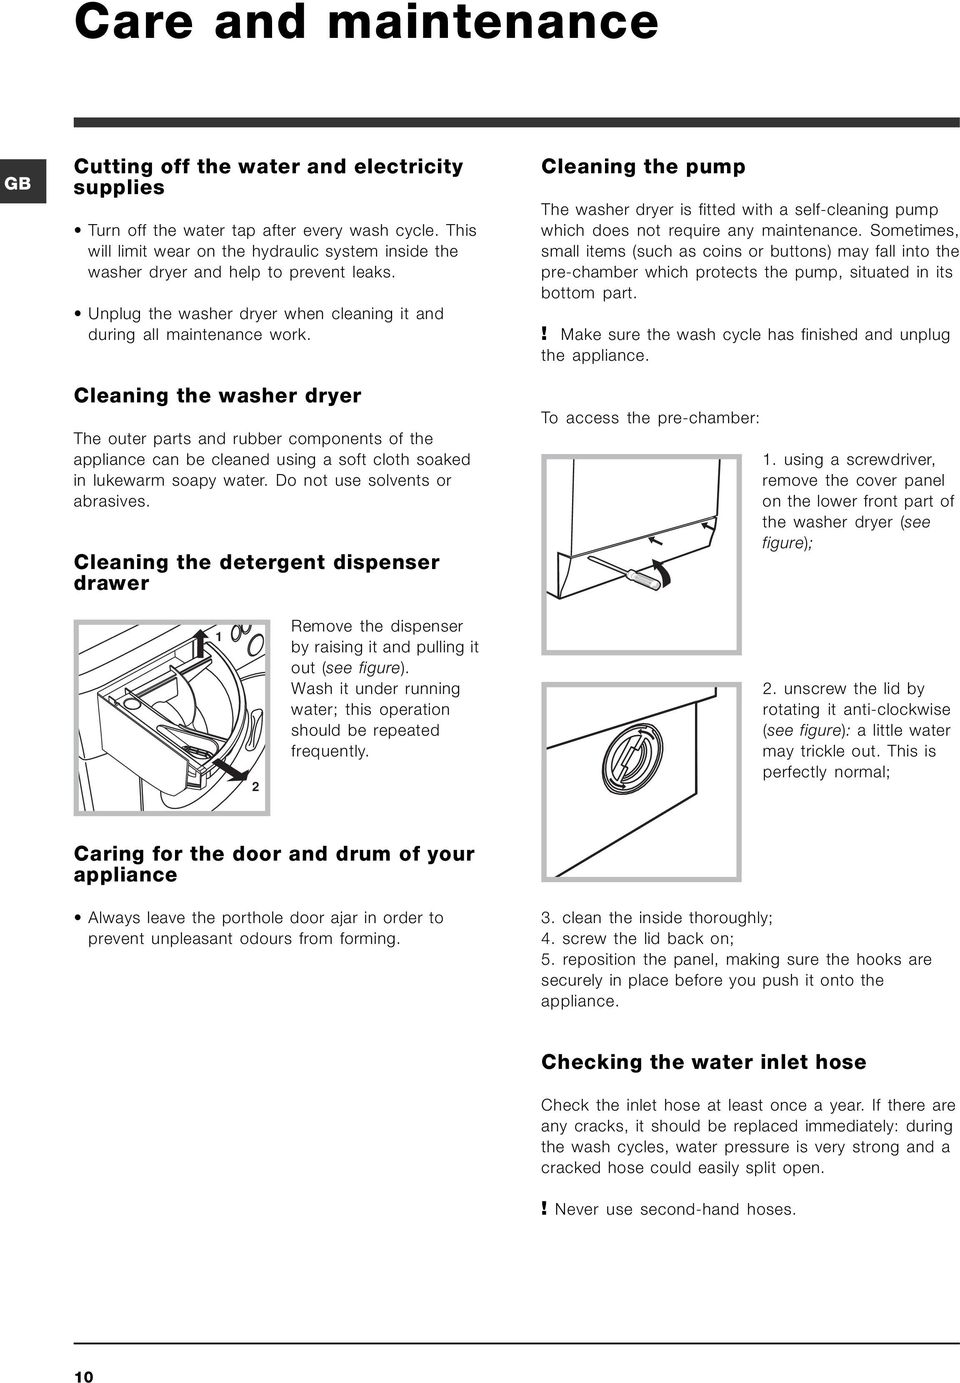 Cleaning the washer dryer The outer parts and rubber components of the appliance can be cleaned using a soft cloth soaked in lukewarm soapy water. Do not use solvents or abrasives.